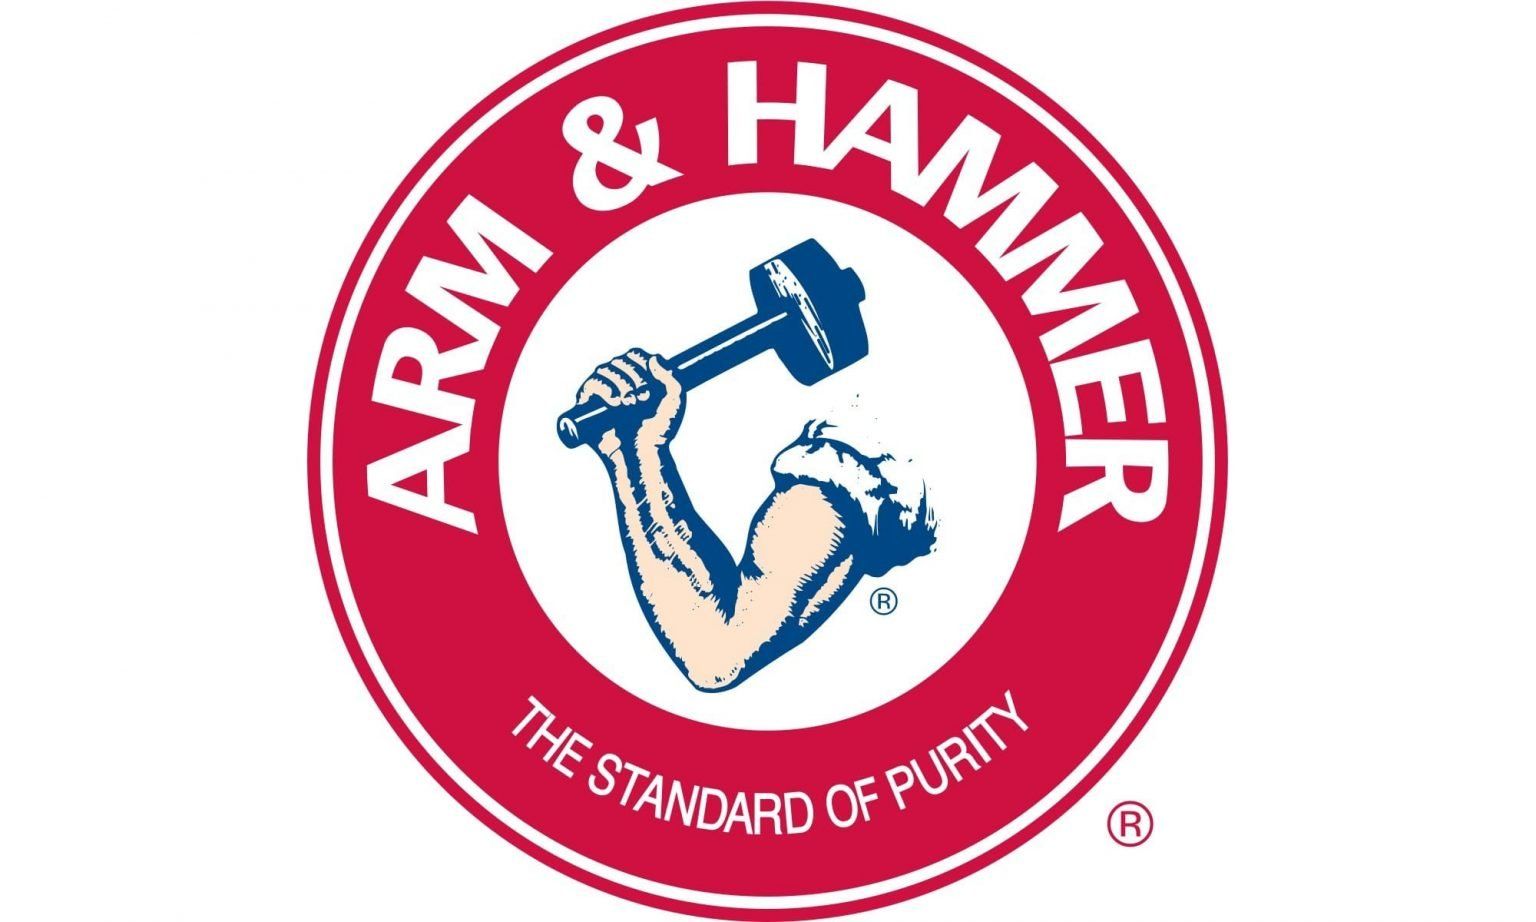 arm and hammer logo